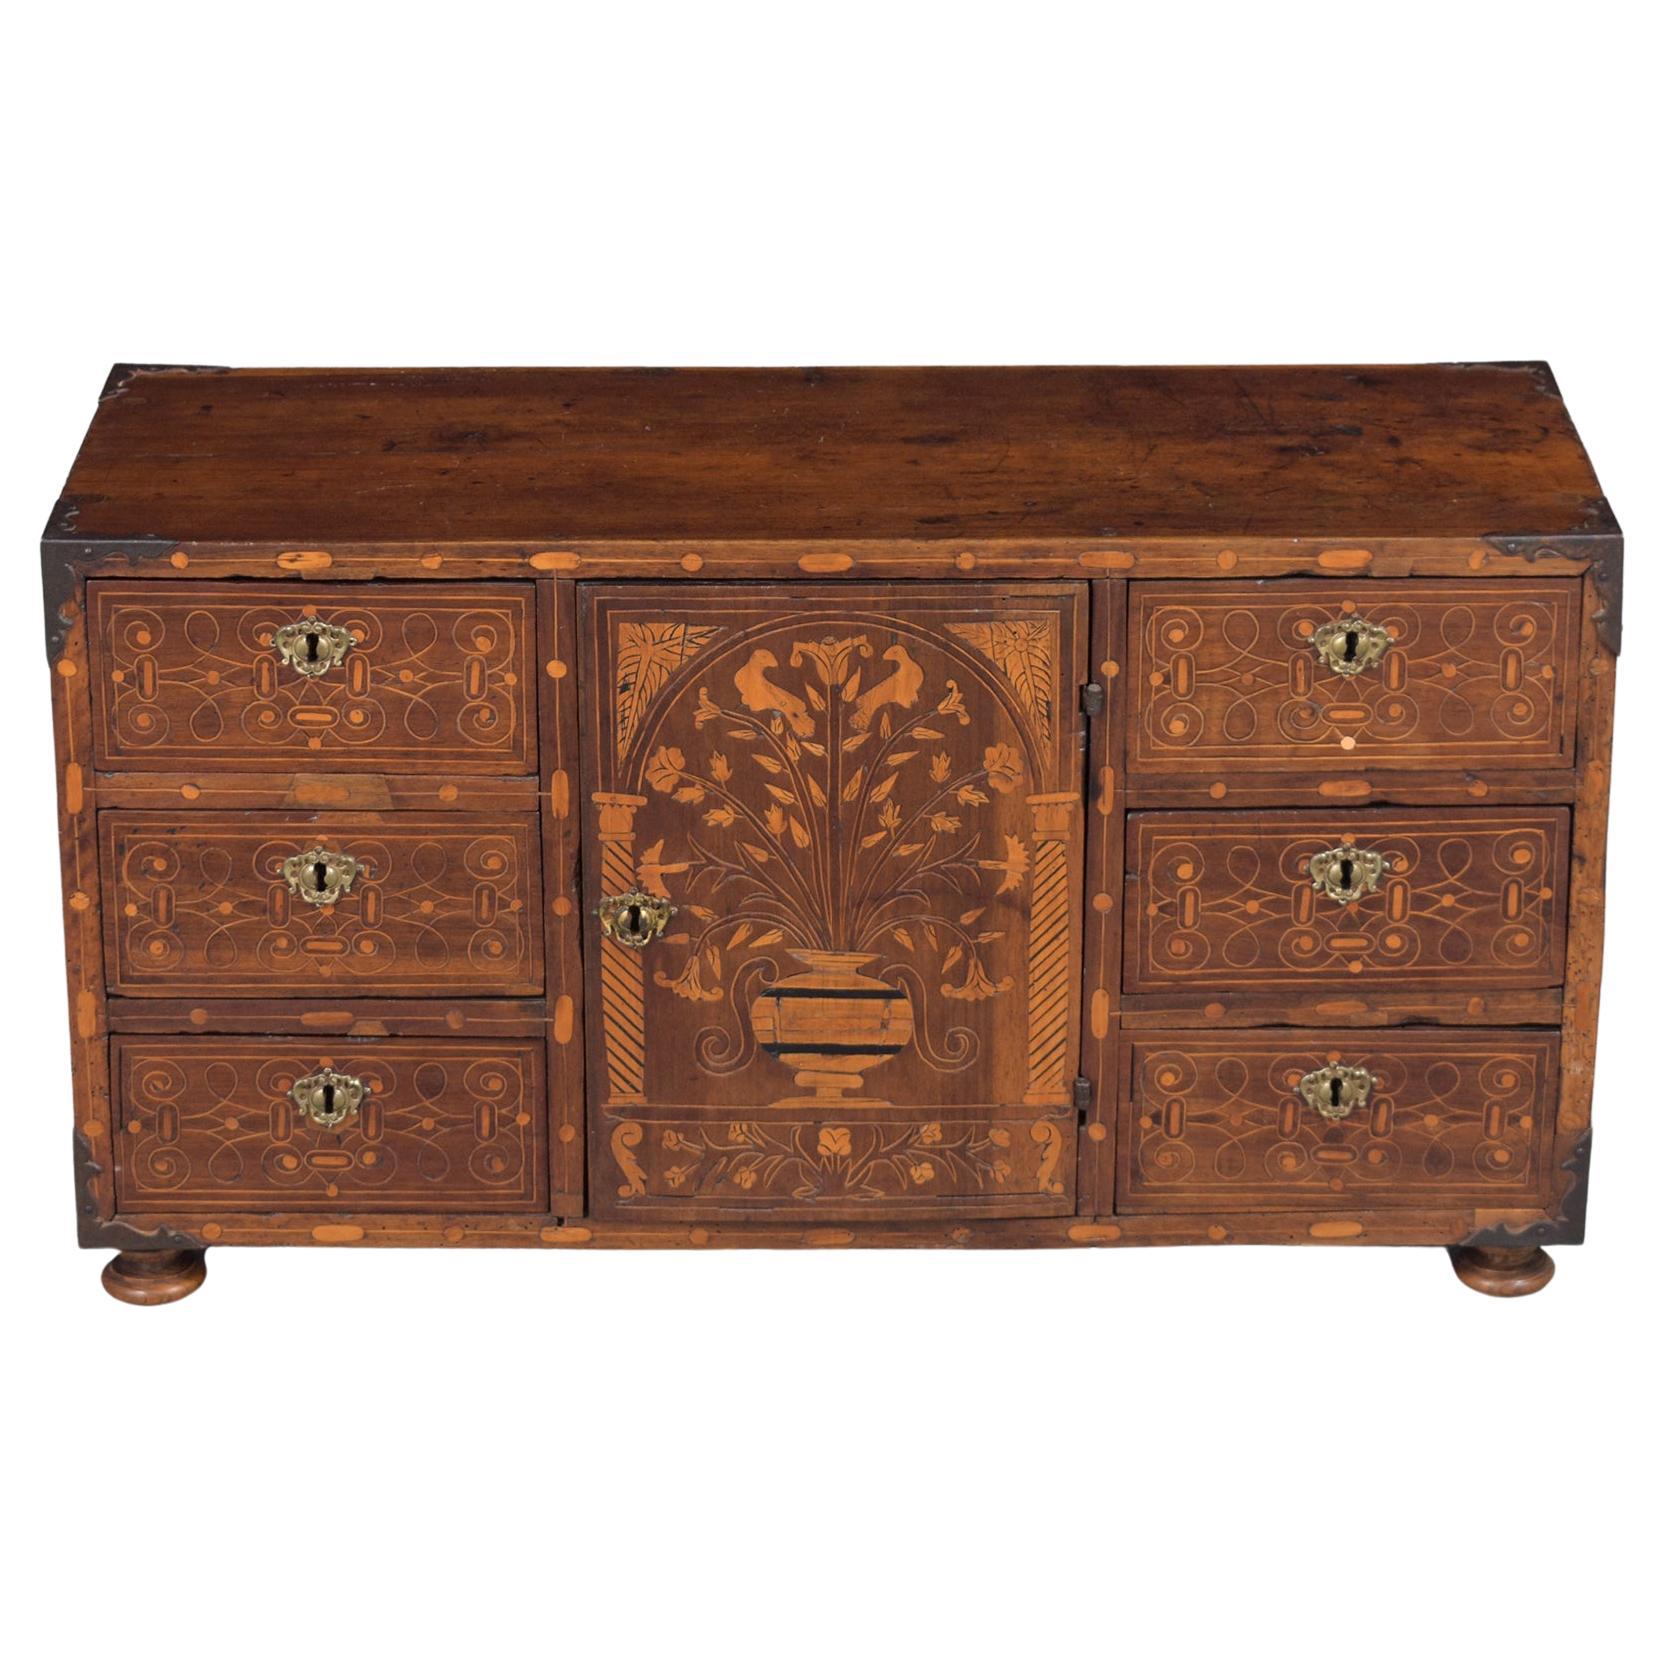 Exquisite 18th-Century Spanish Bargueño Cabinet: Walnut with Marquetry Inlays For Sale